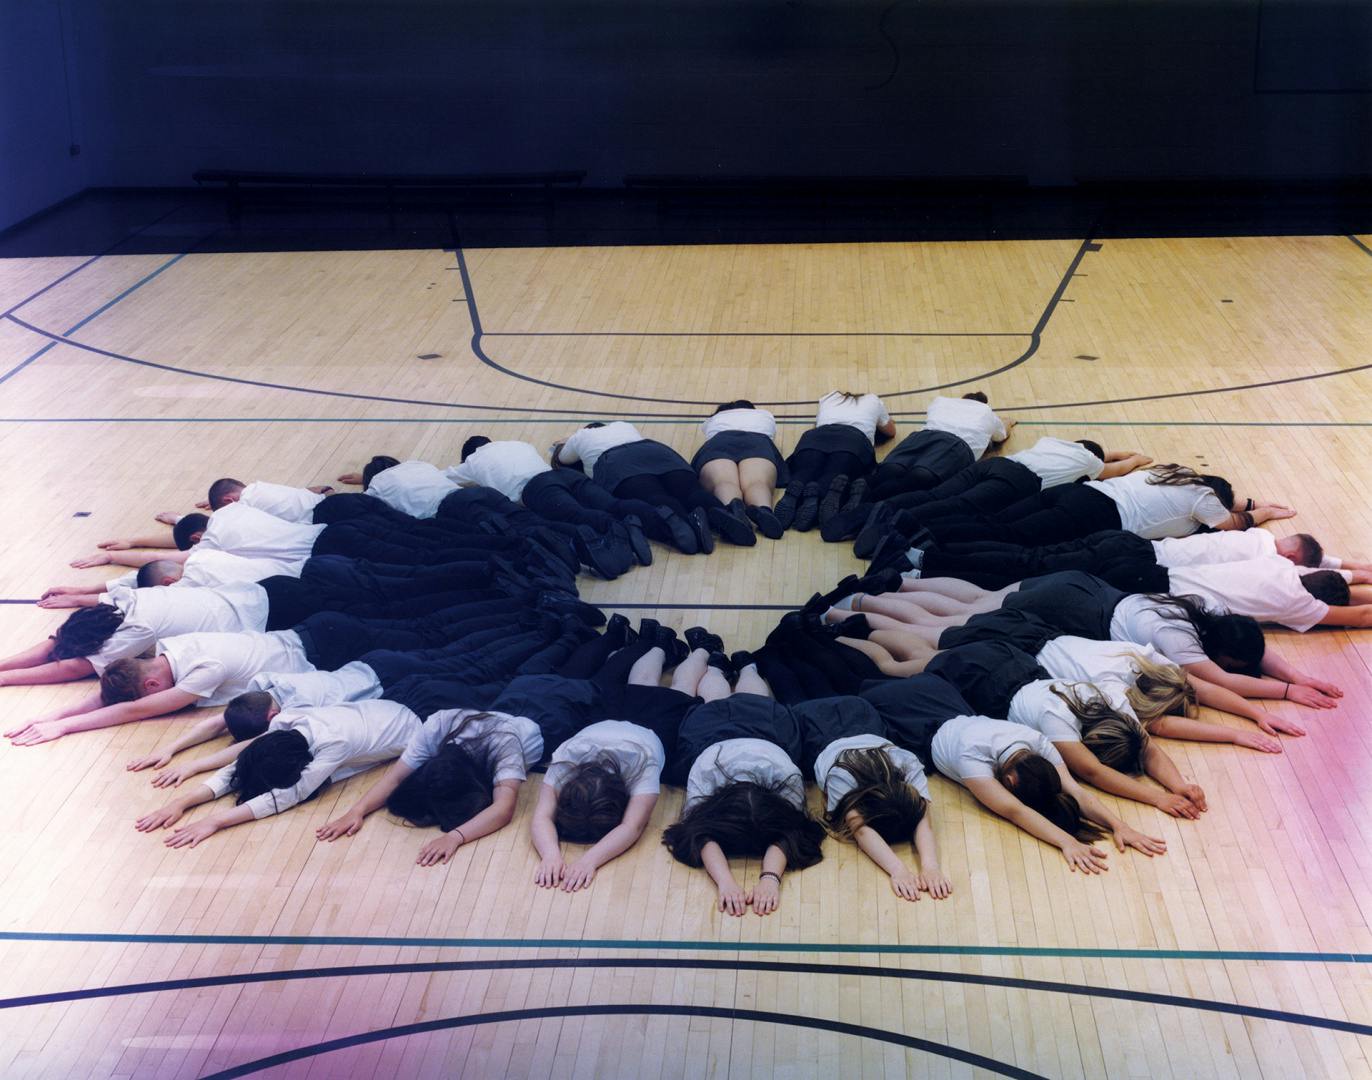 Oliver Chanarin A Perfect Sentence showing a group of school children lying on their front forming the shape of a circle on an indoor basketball court